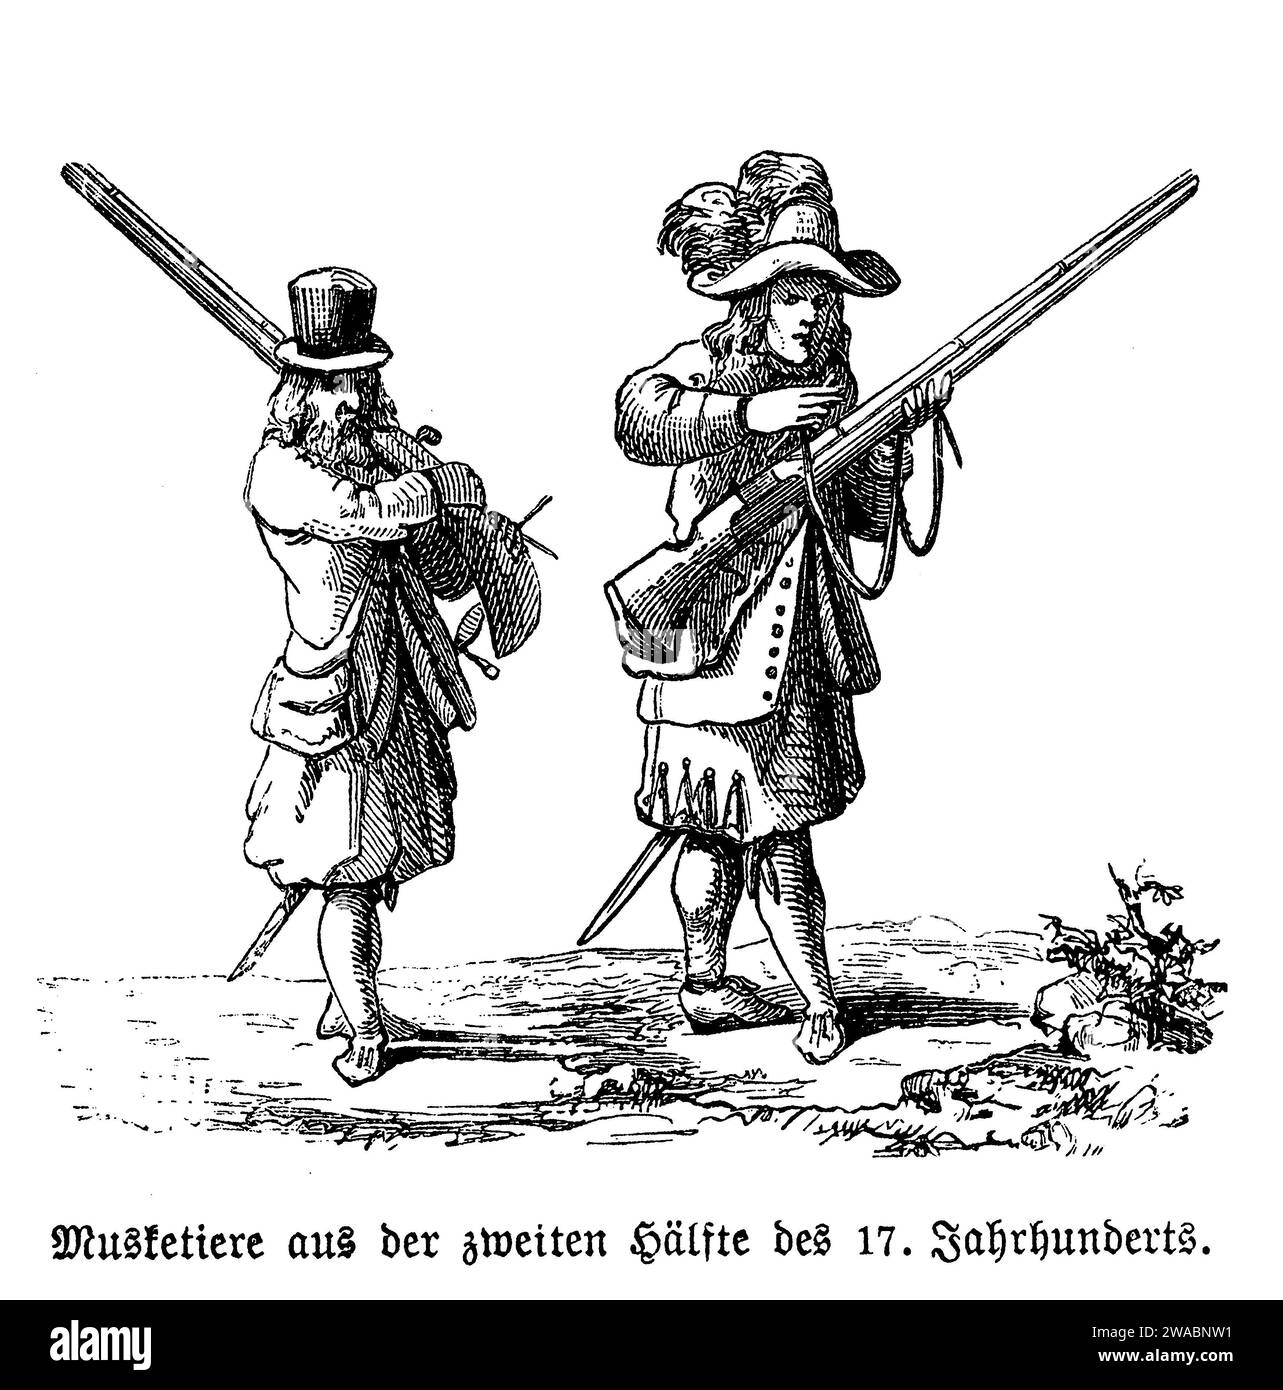 French musketeers with  hat, sword and costume  holding a musket rifle, 17th century Stock Photo